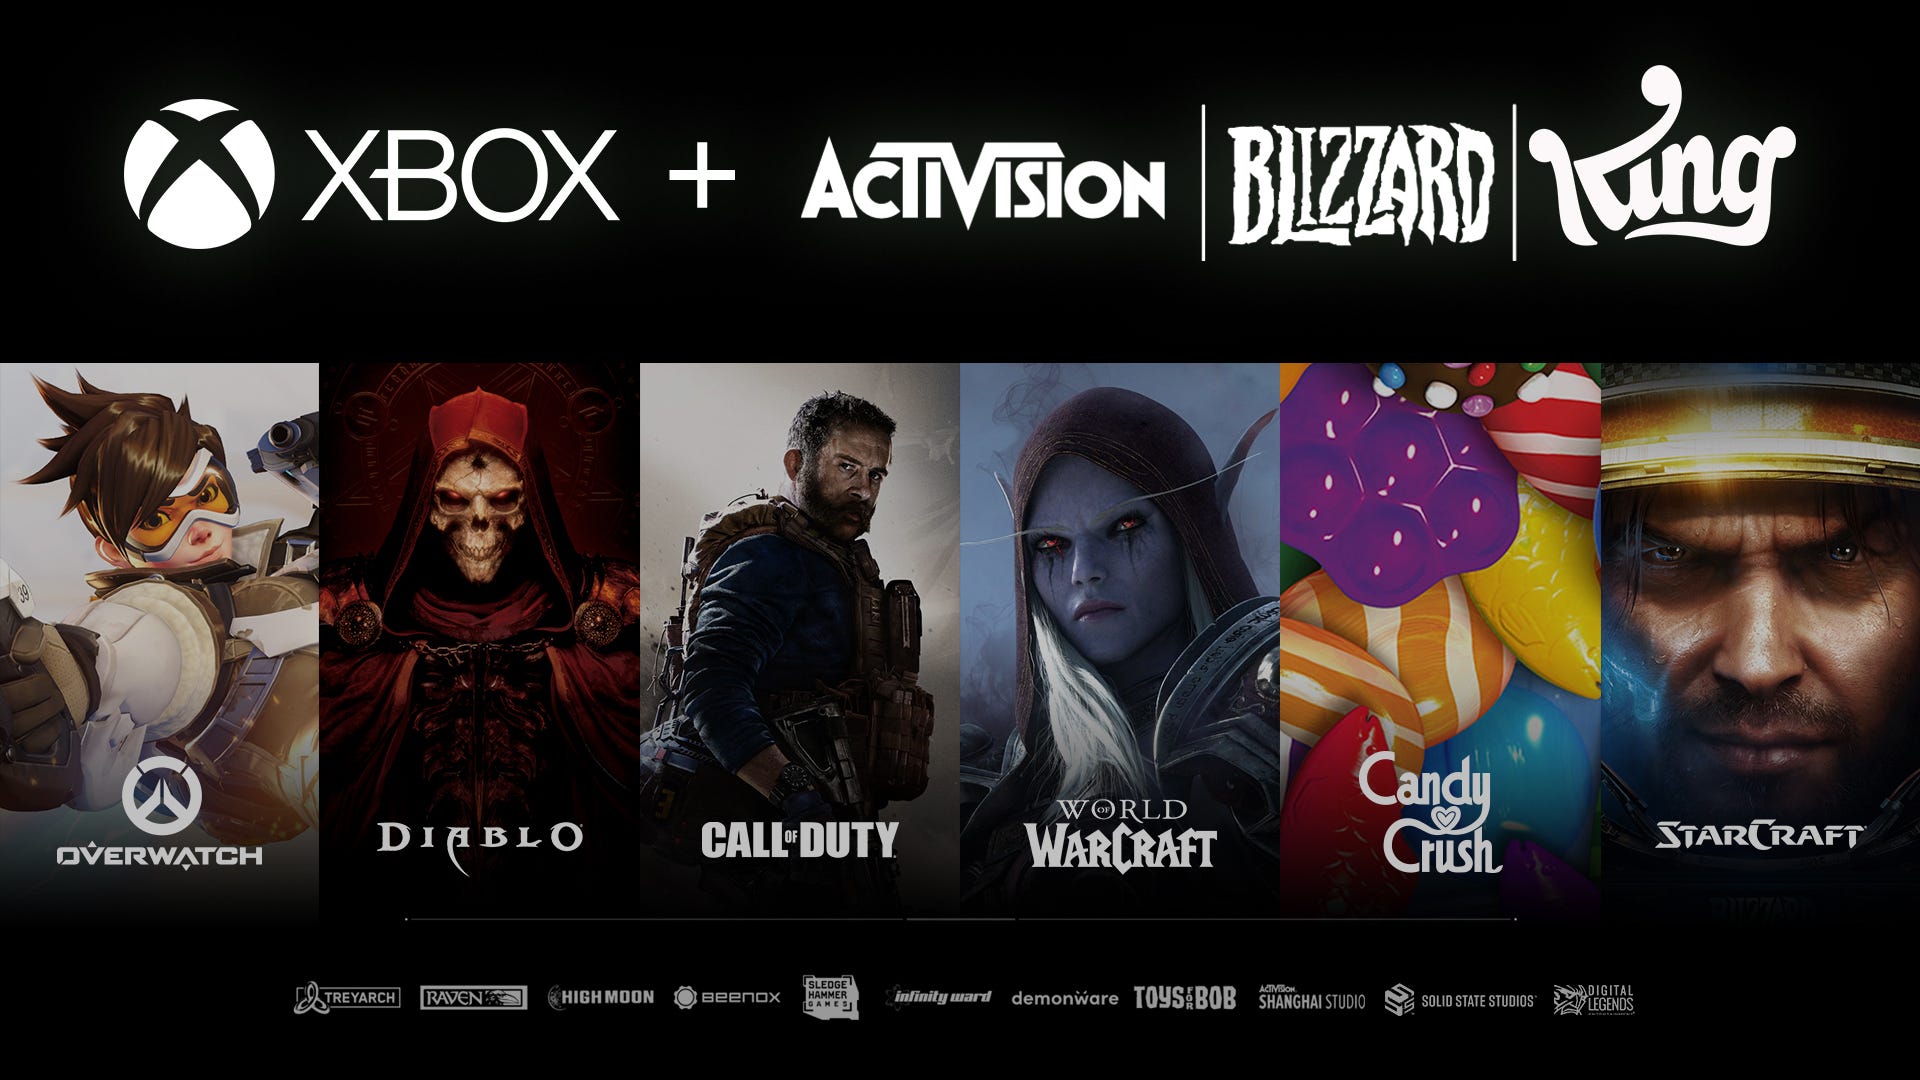 Microsoft Xbox plus Activision Blizzard King banner with game titles